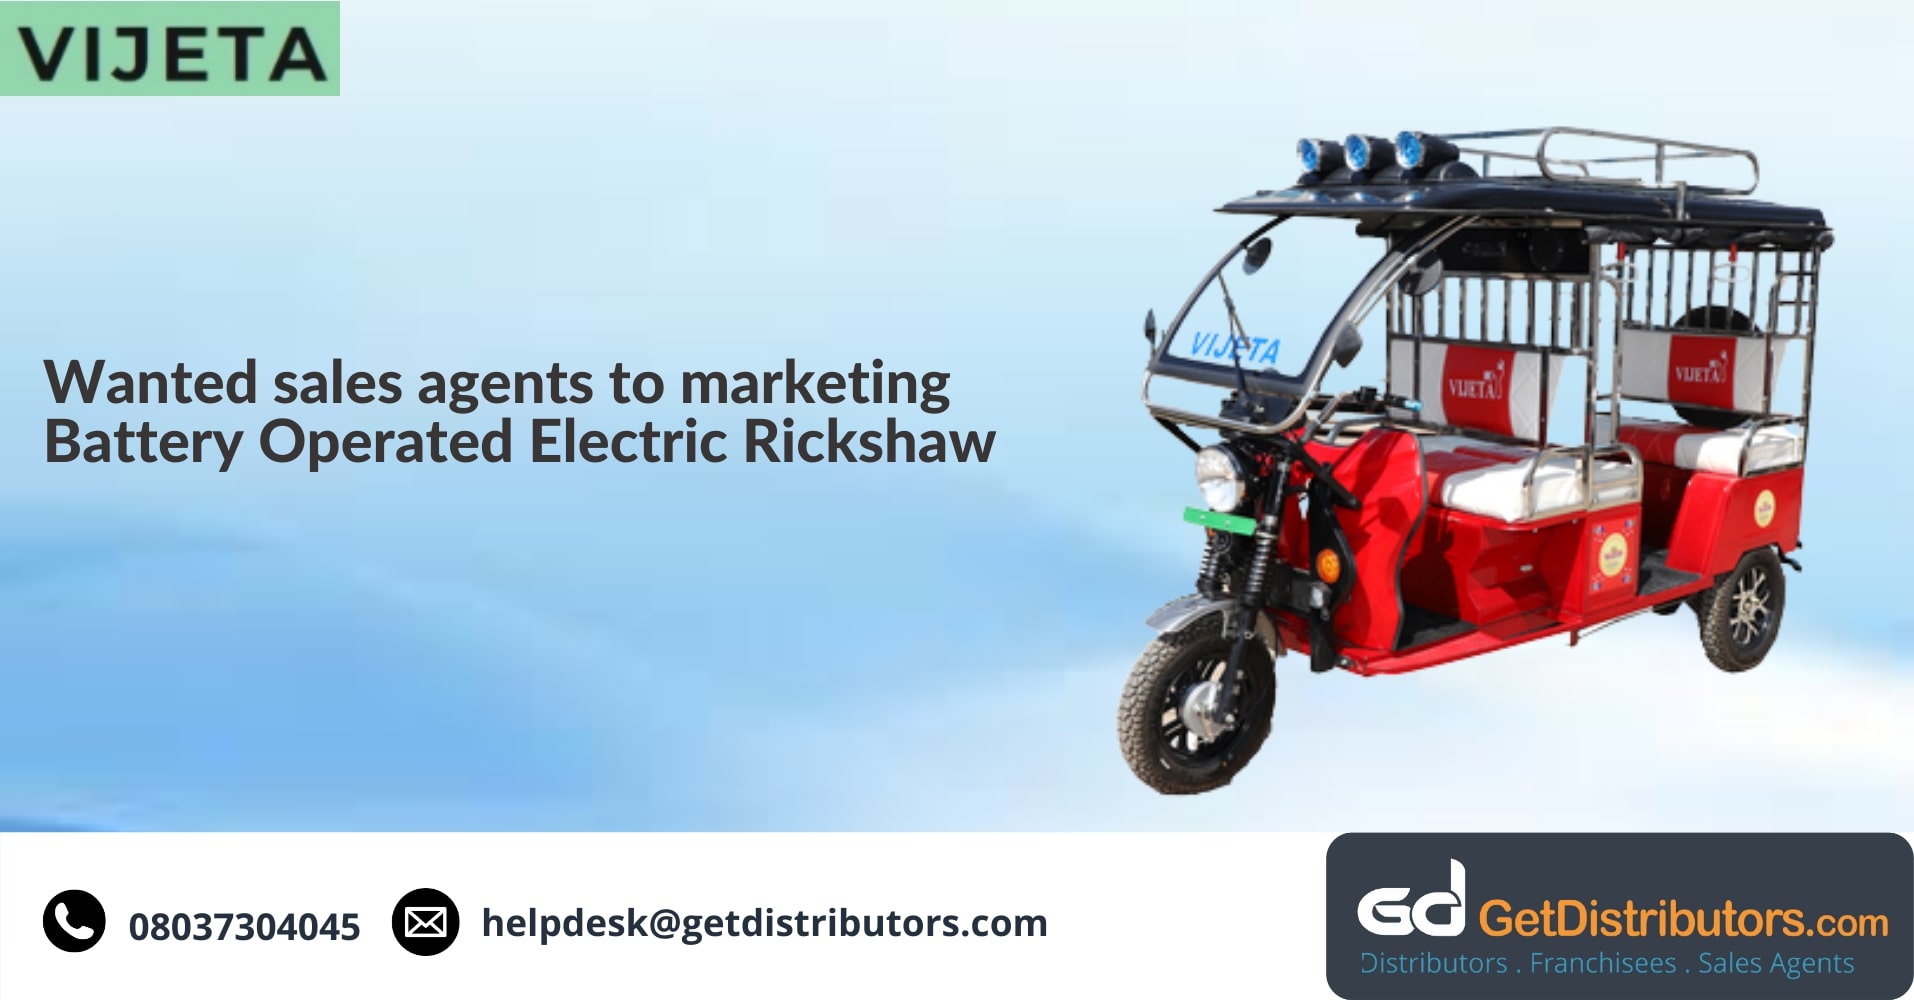 Wanted sales agents for marketing eco-friendly electric vehicles